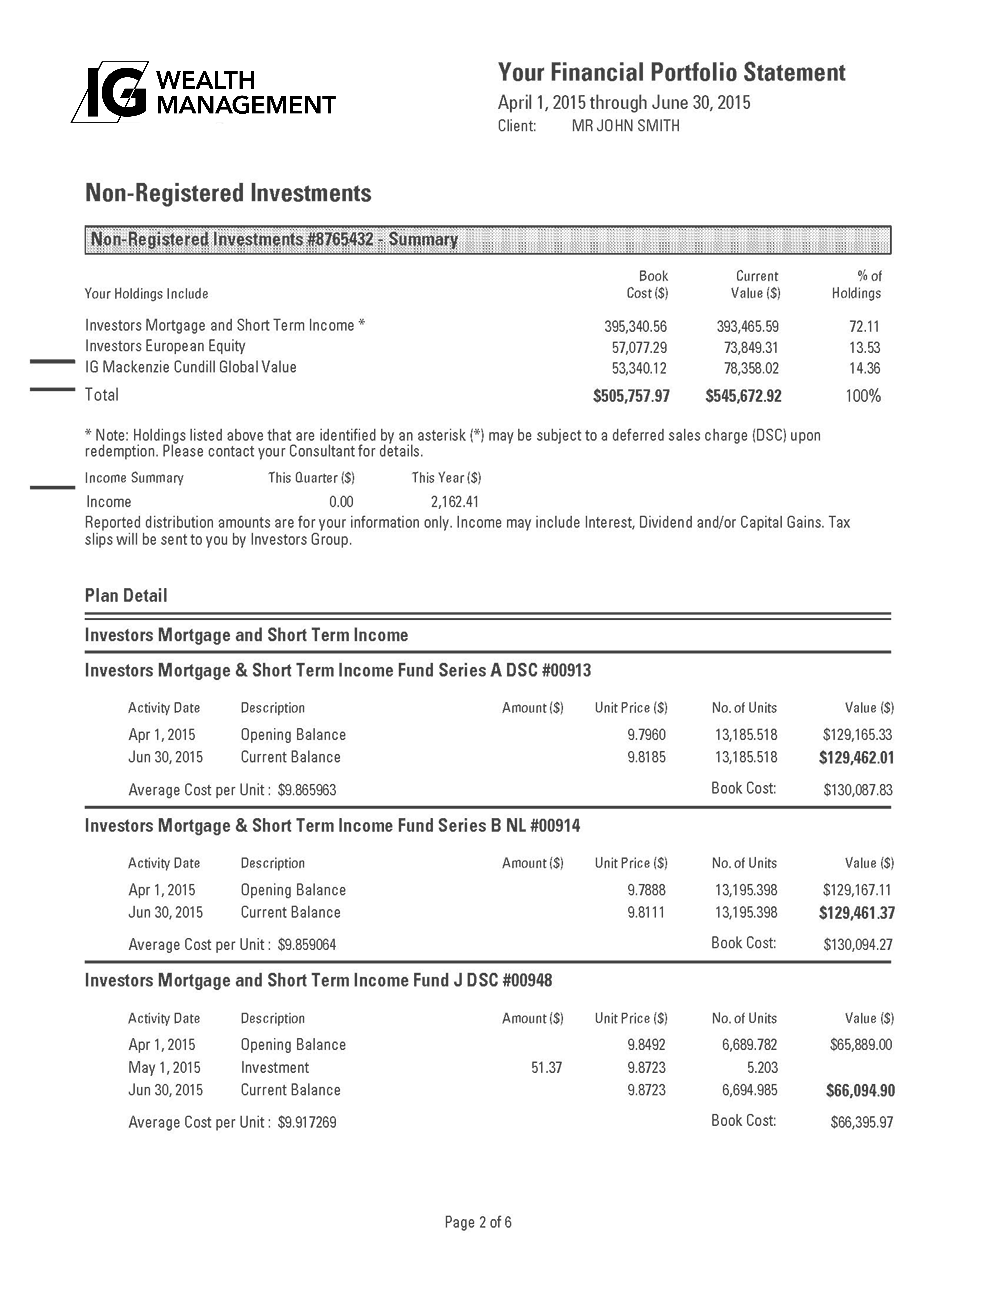 Non-Registered Investments